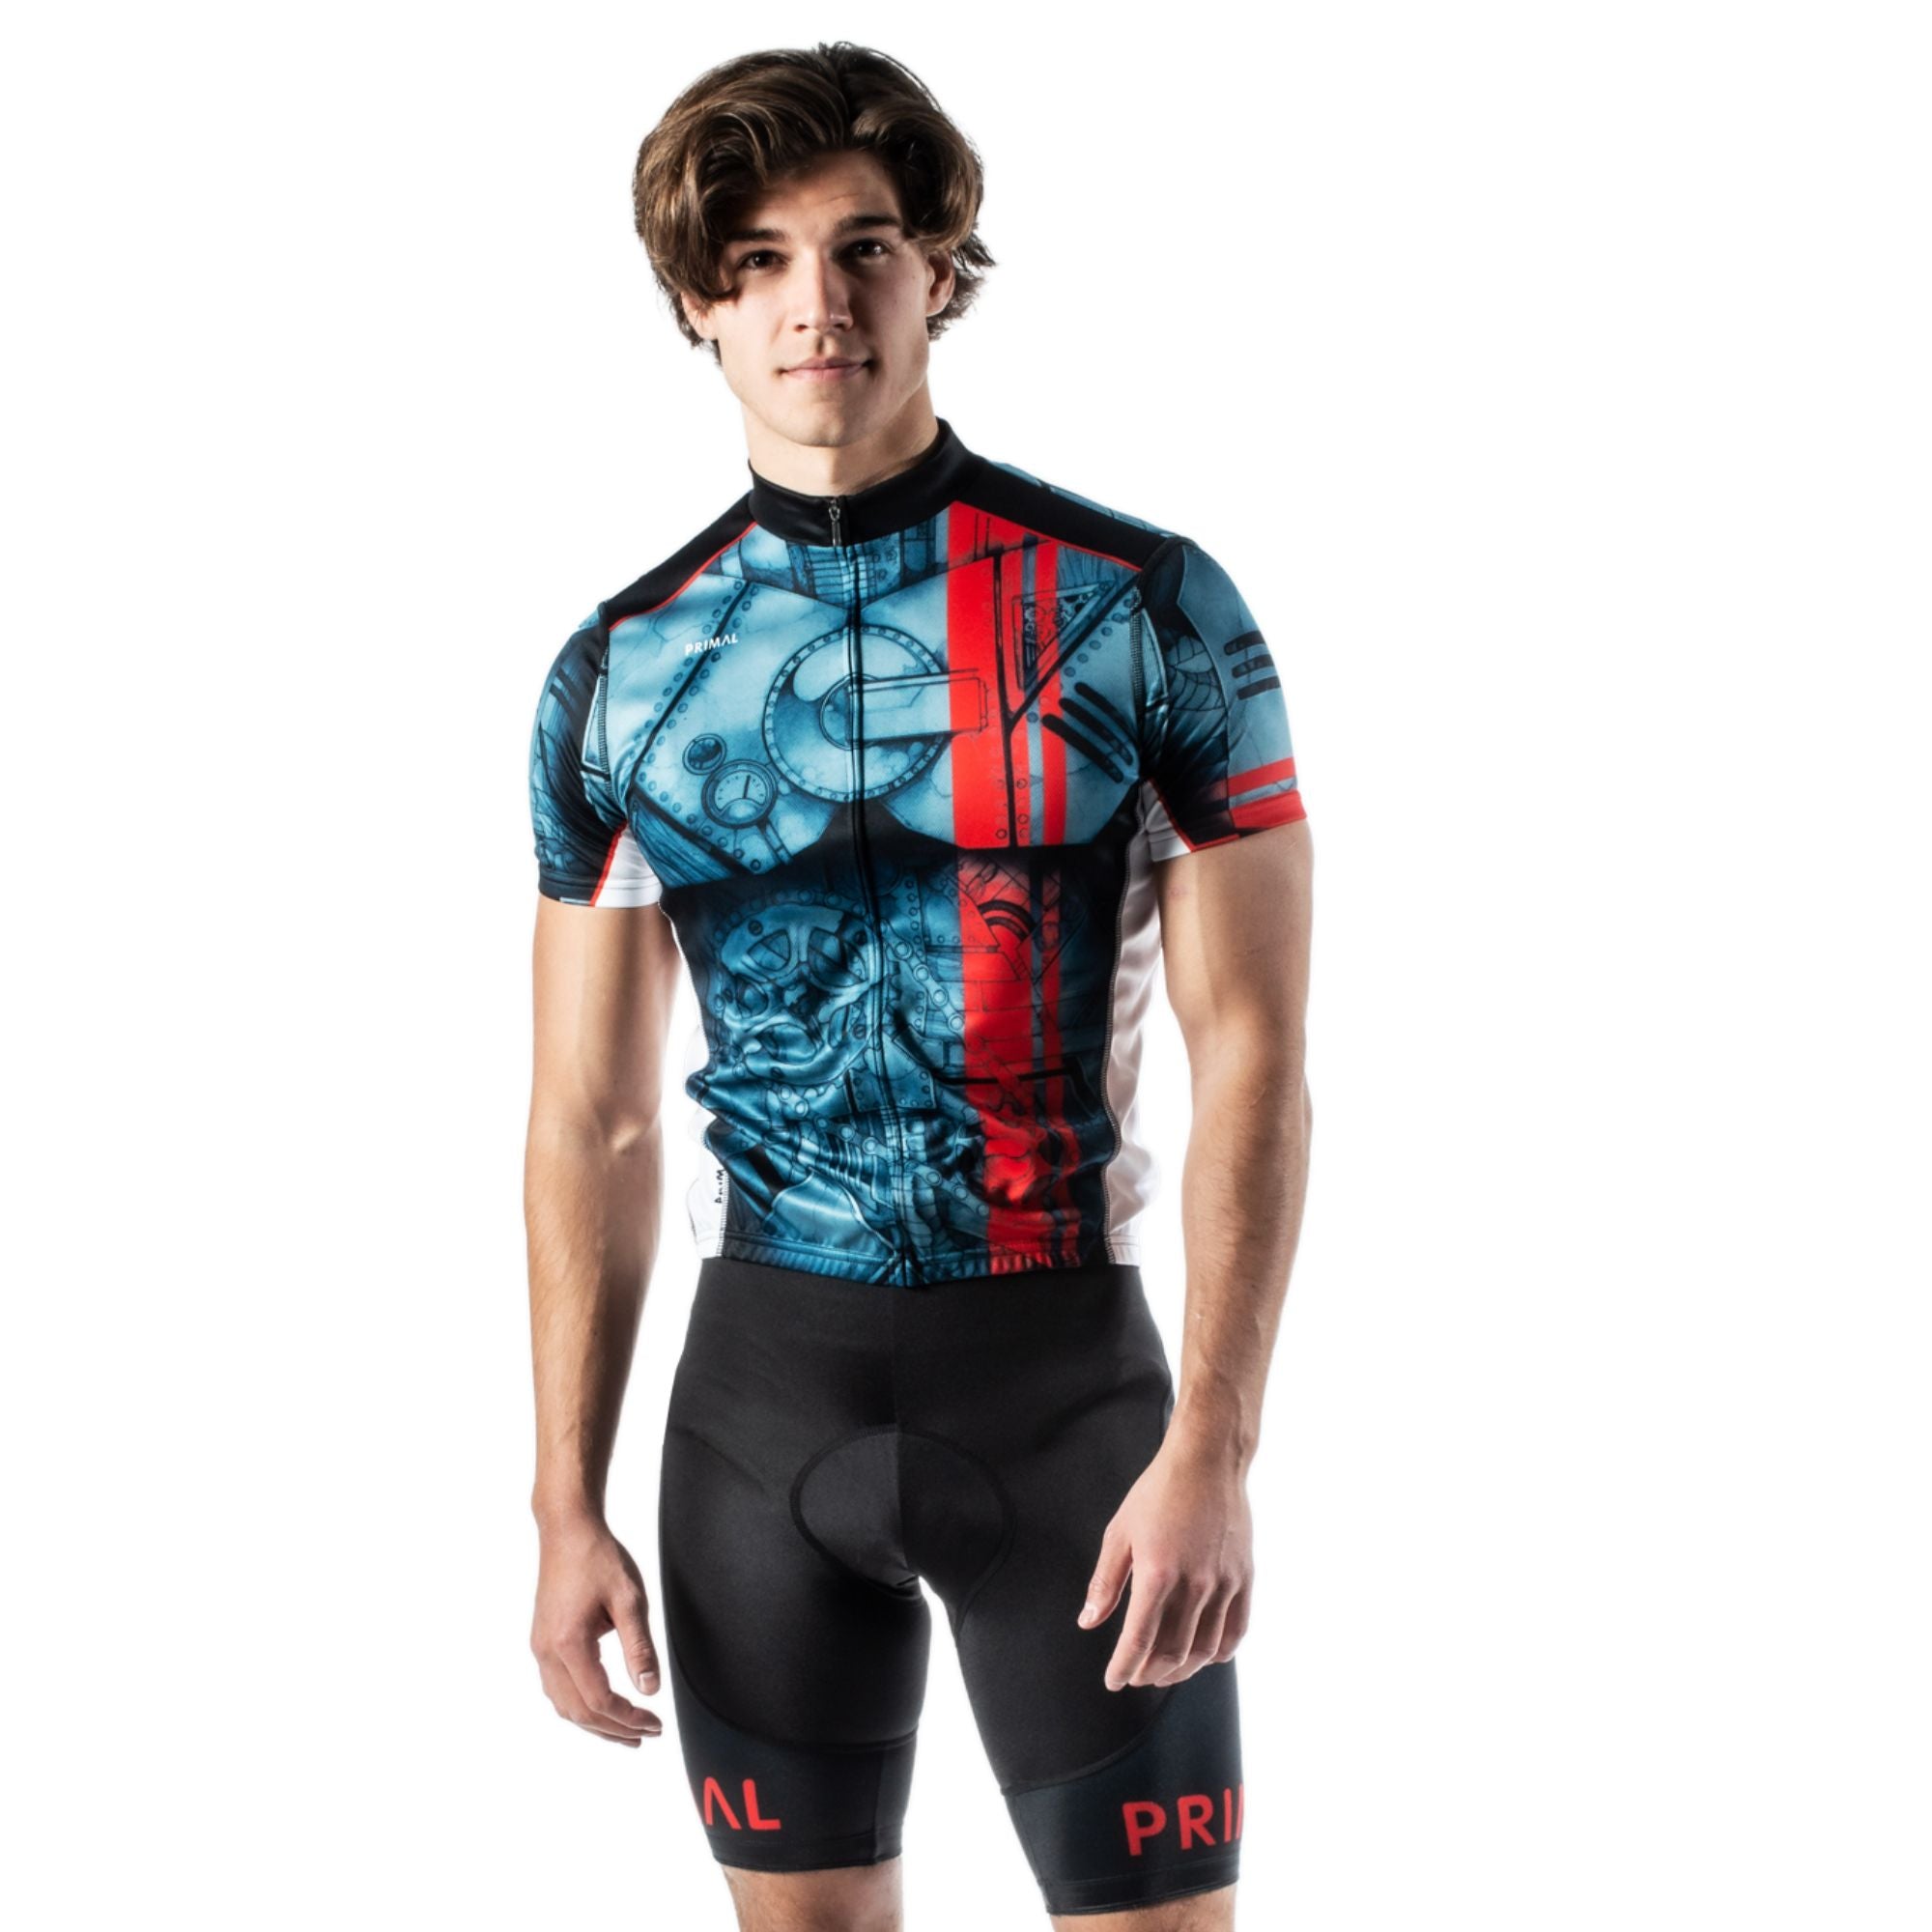  Primal Wear Men's Torque Jersey, X-Large, Blue : Cycling  Jerseys : Clothing, Shoes & Jewelry